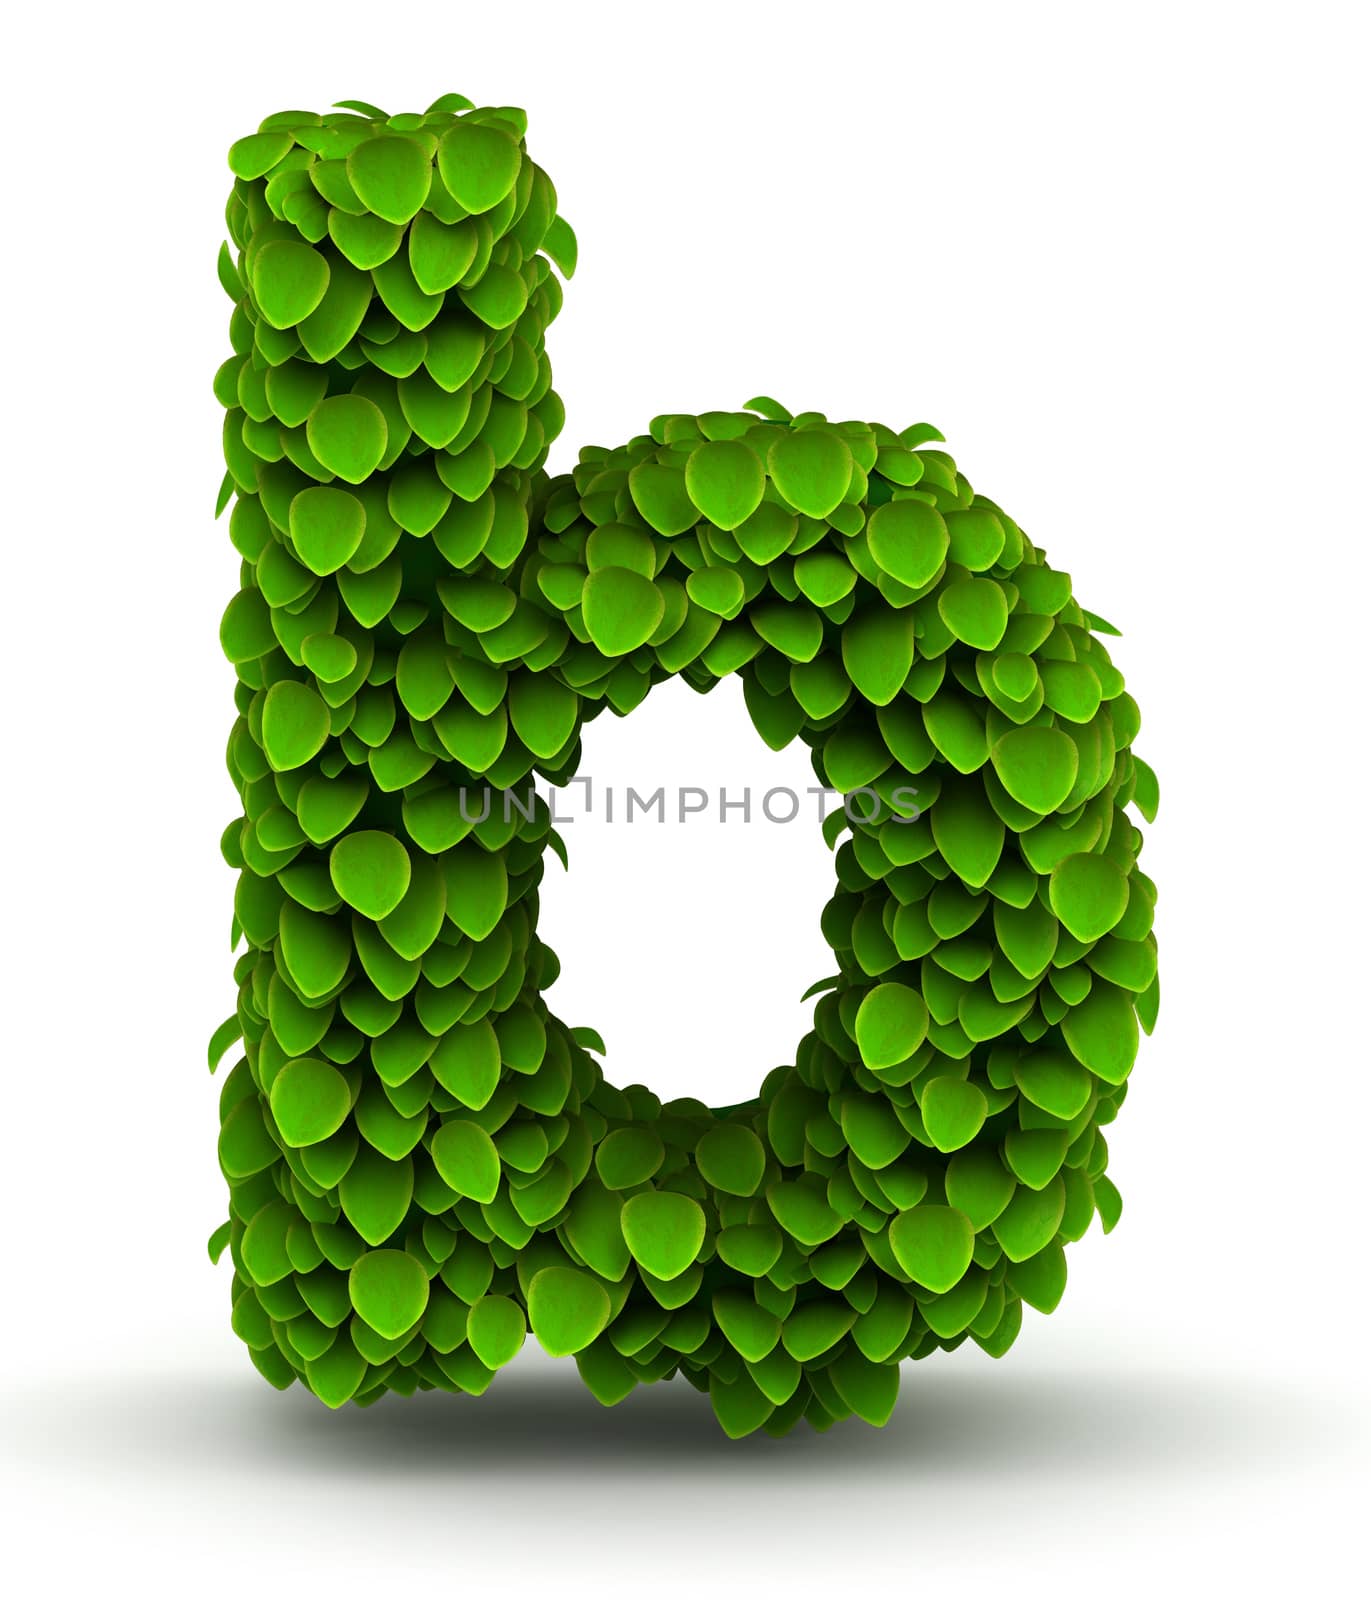 Leaves font letter b lowercase by iunewind